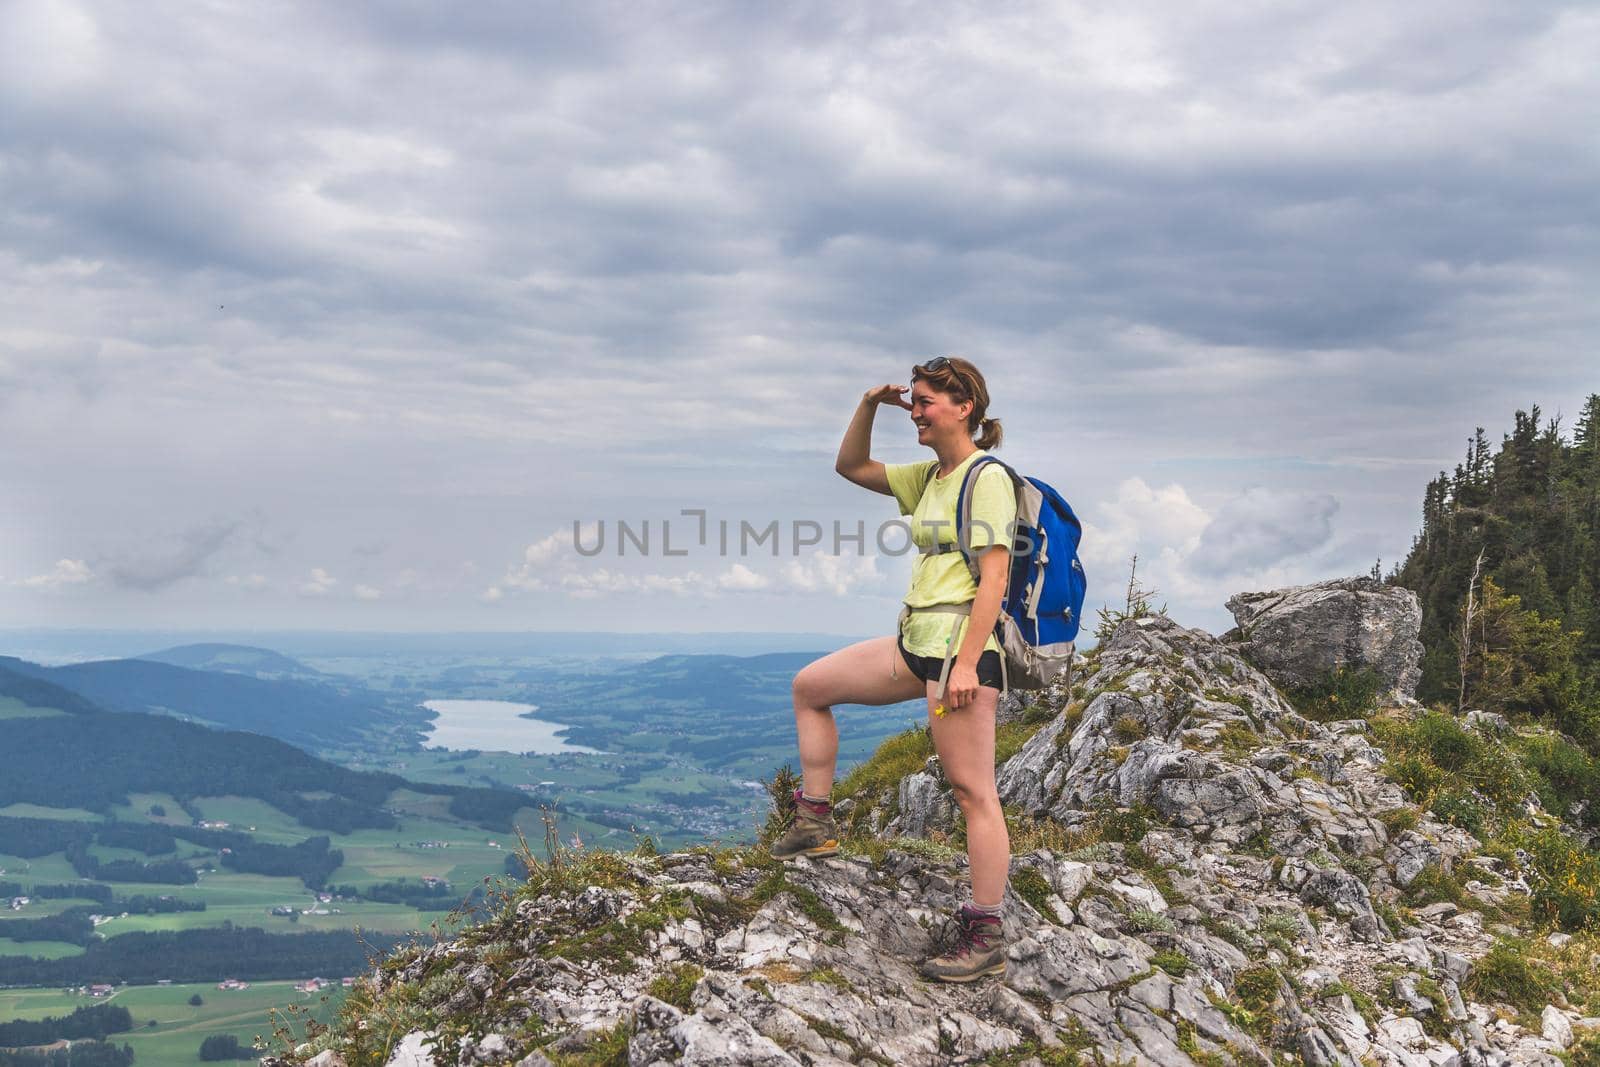 Adventure in the mountains. Young tourist girl on the top of a rocky mountain in Austria by Daxenbichler